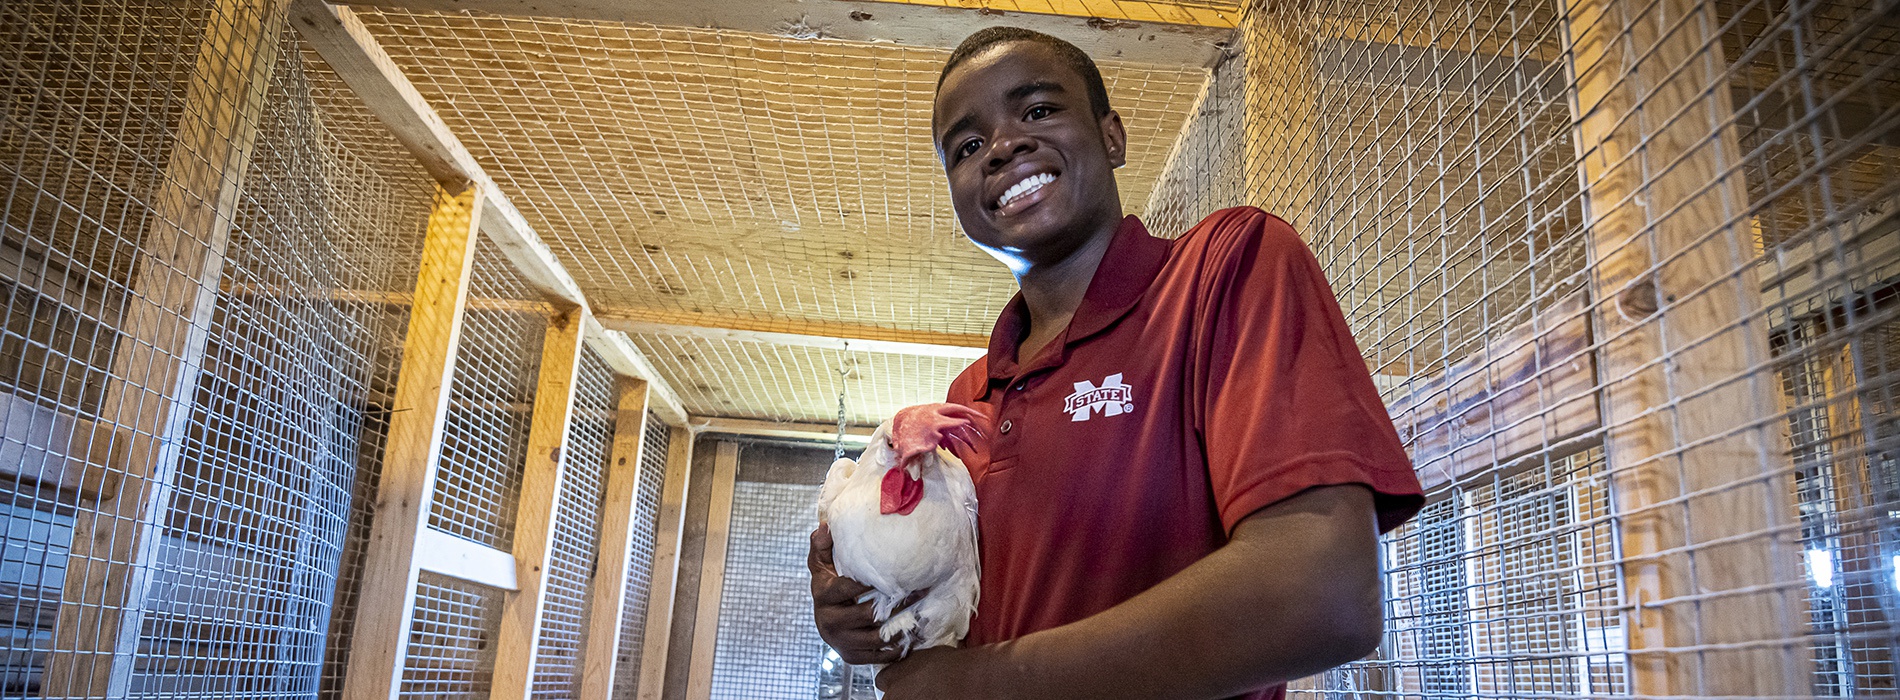 Young man holding hen in large chicken coop.